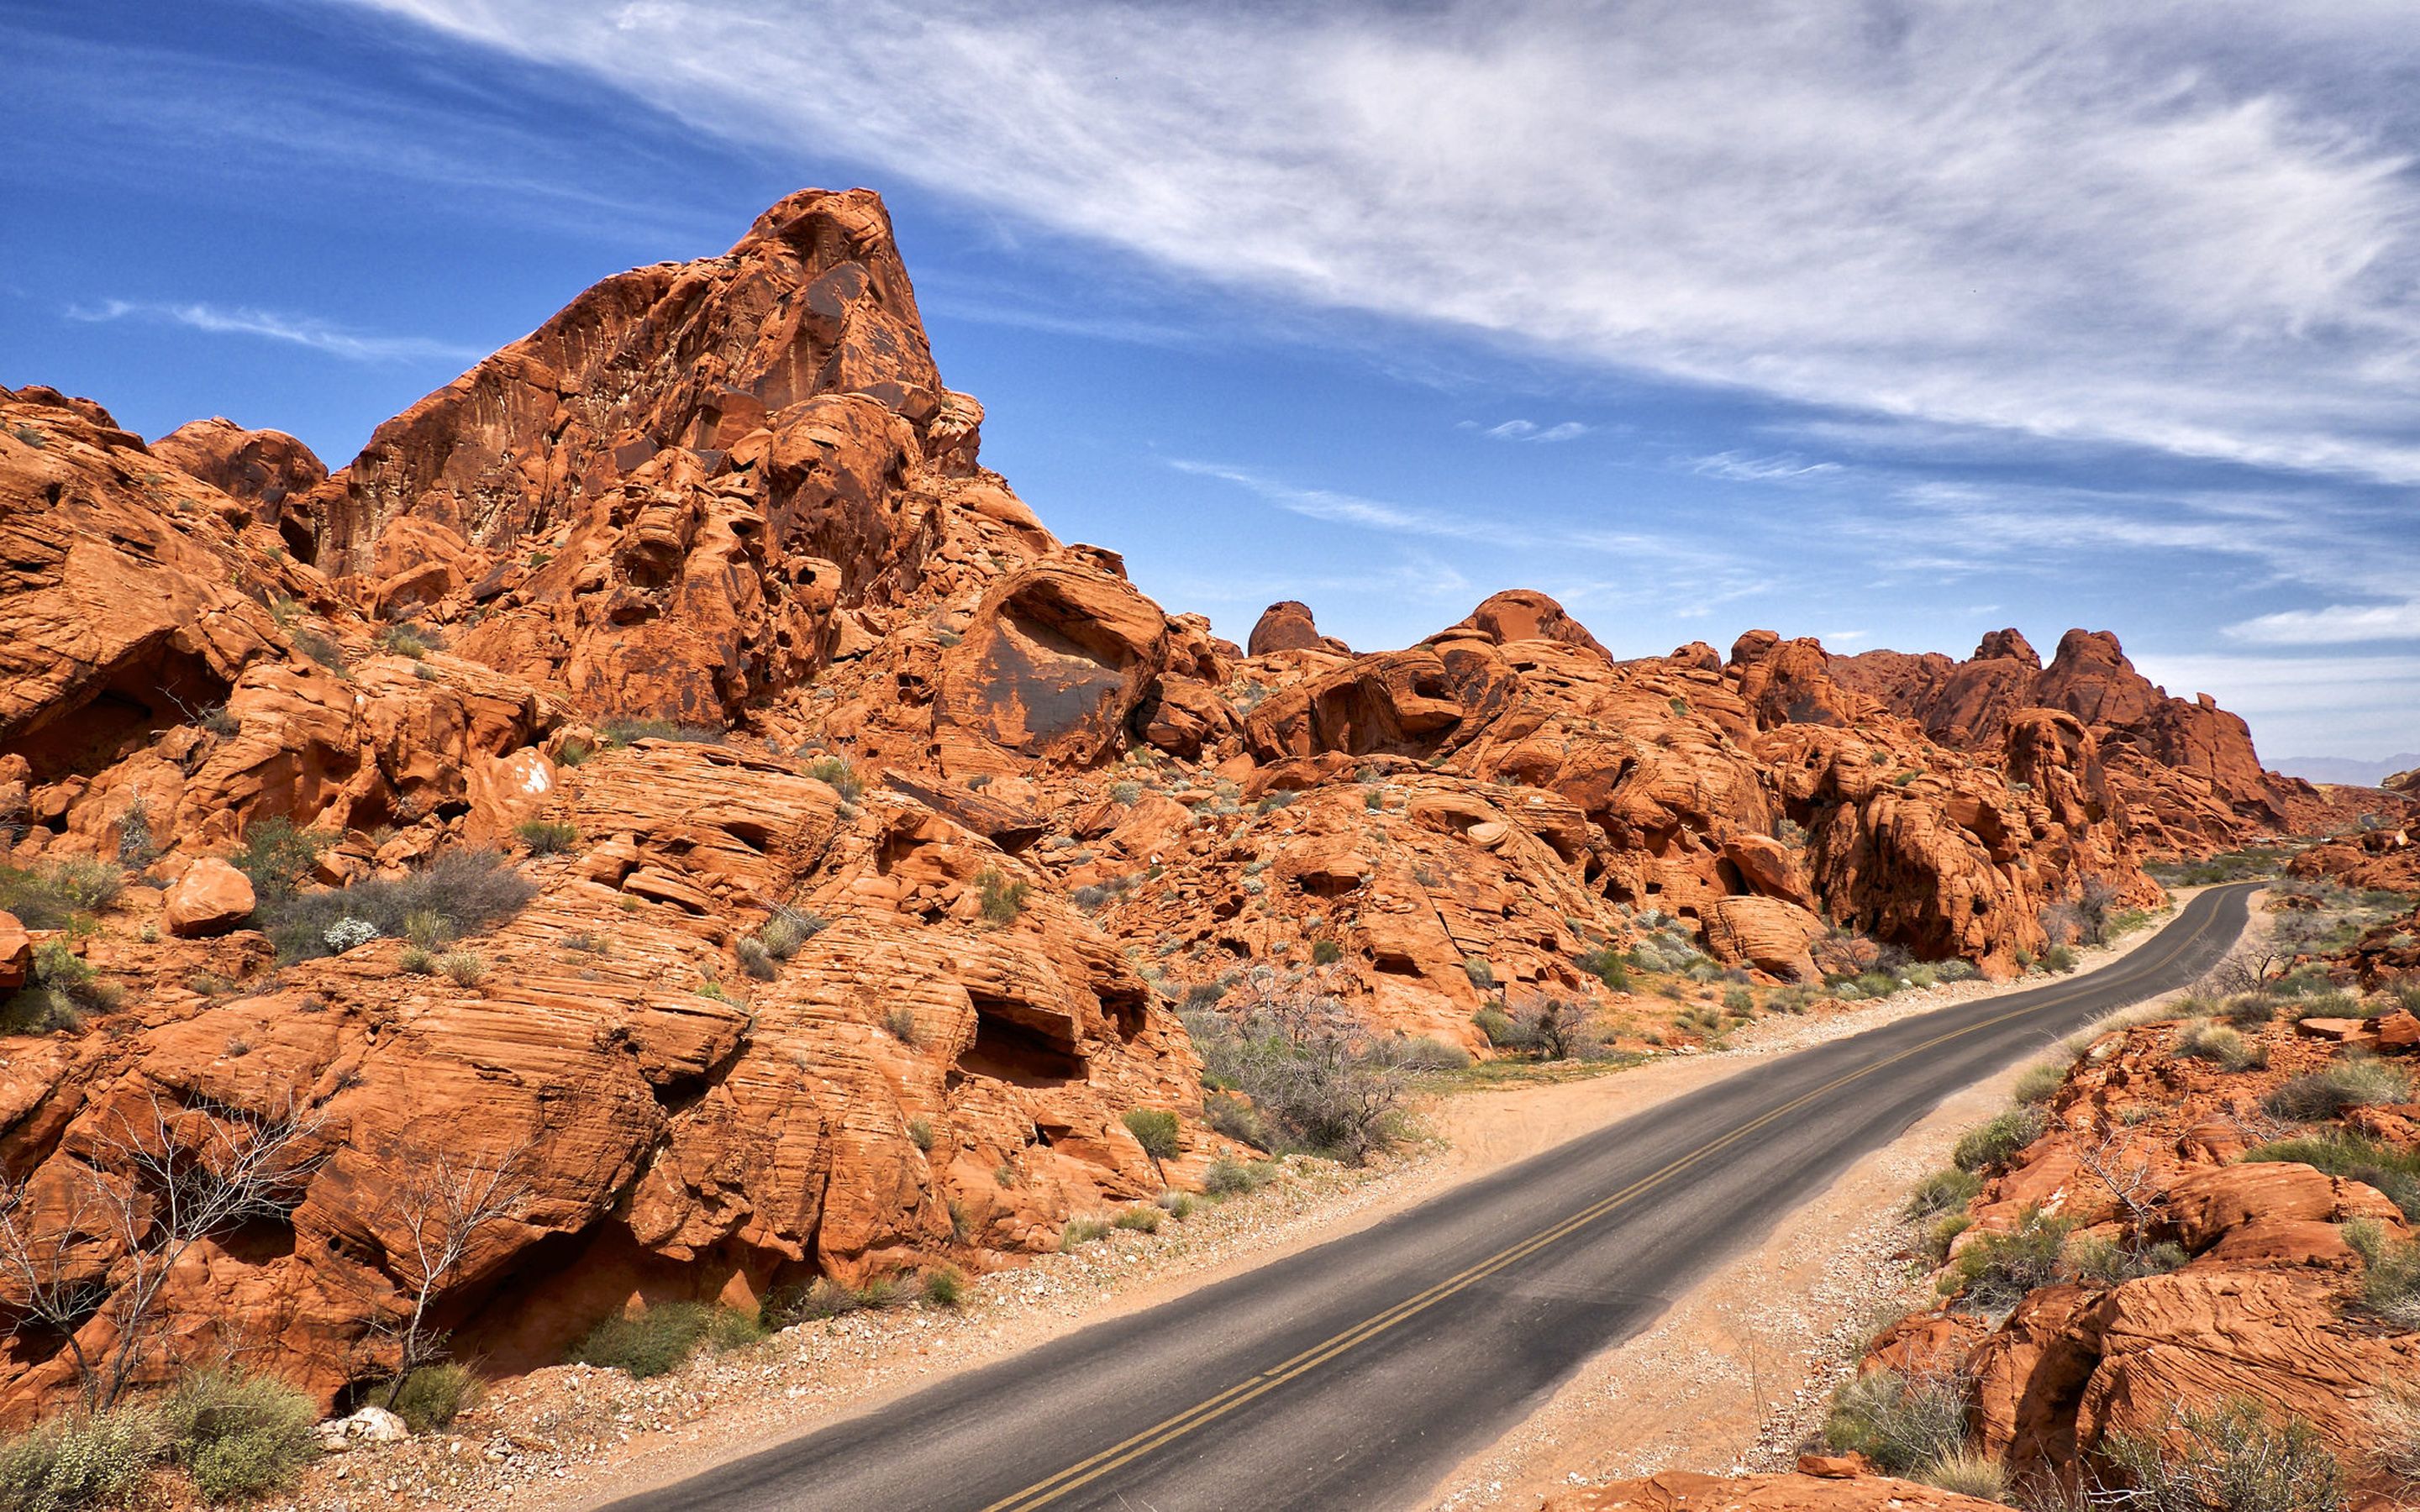 Valley Of Fire State Park, In The Mojave Desert, Lies 50 Miles 80 Km North Of Las Vegas Desktop Hd Wallpapers 2880x1800 : Wallpapers13